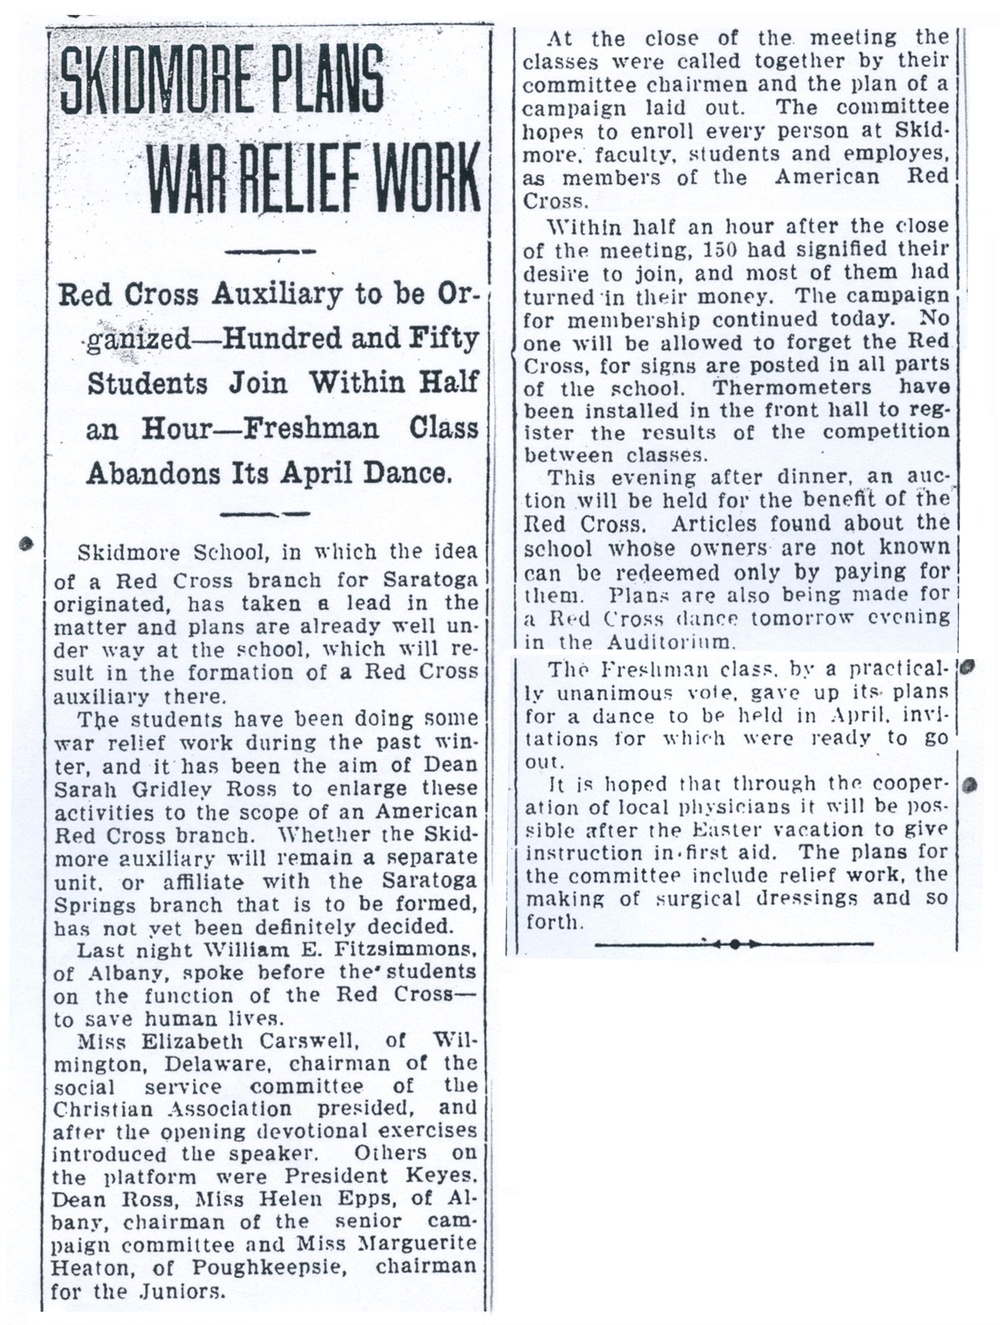 A black and white newspaper article excerpt with the headline “Skidmore Plans War Relief Work” in large font, followed by smaller text in two margins. 